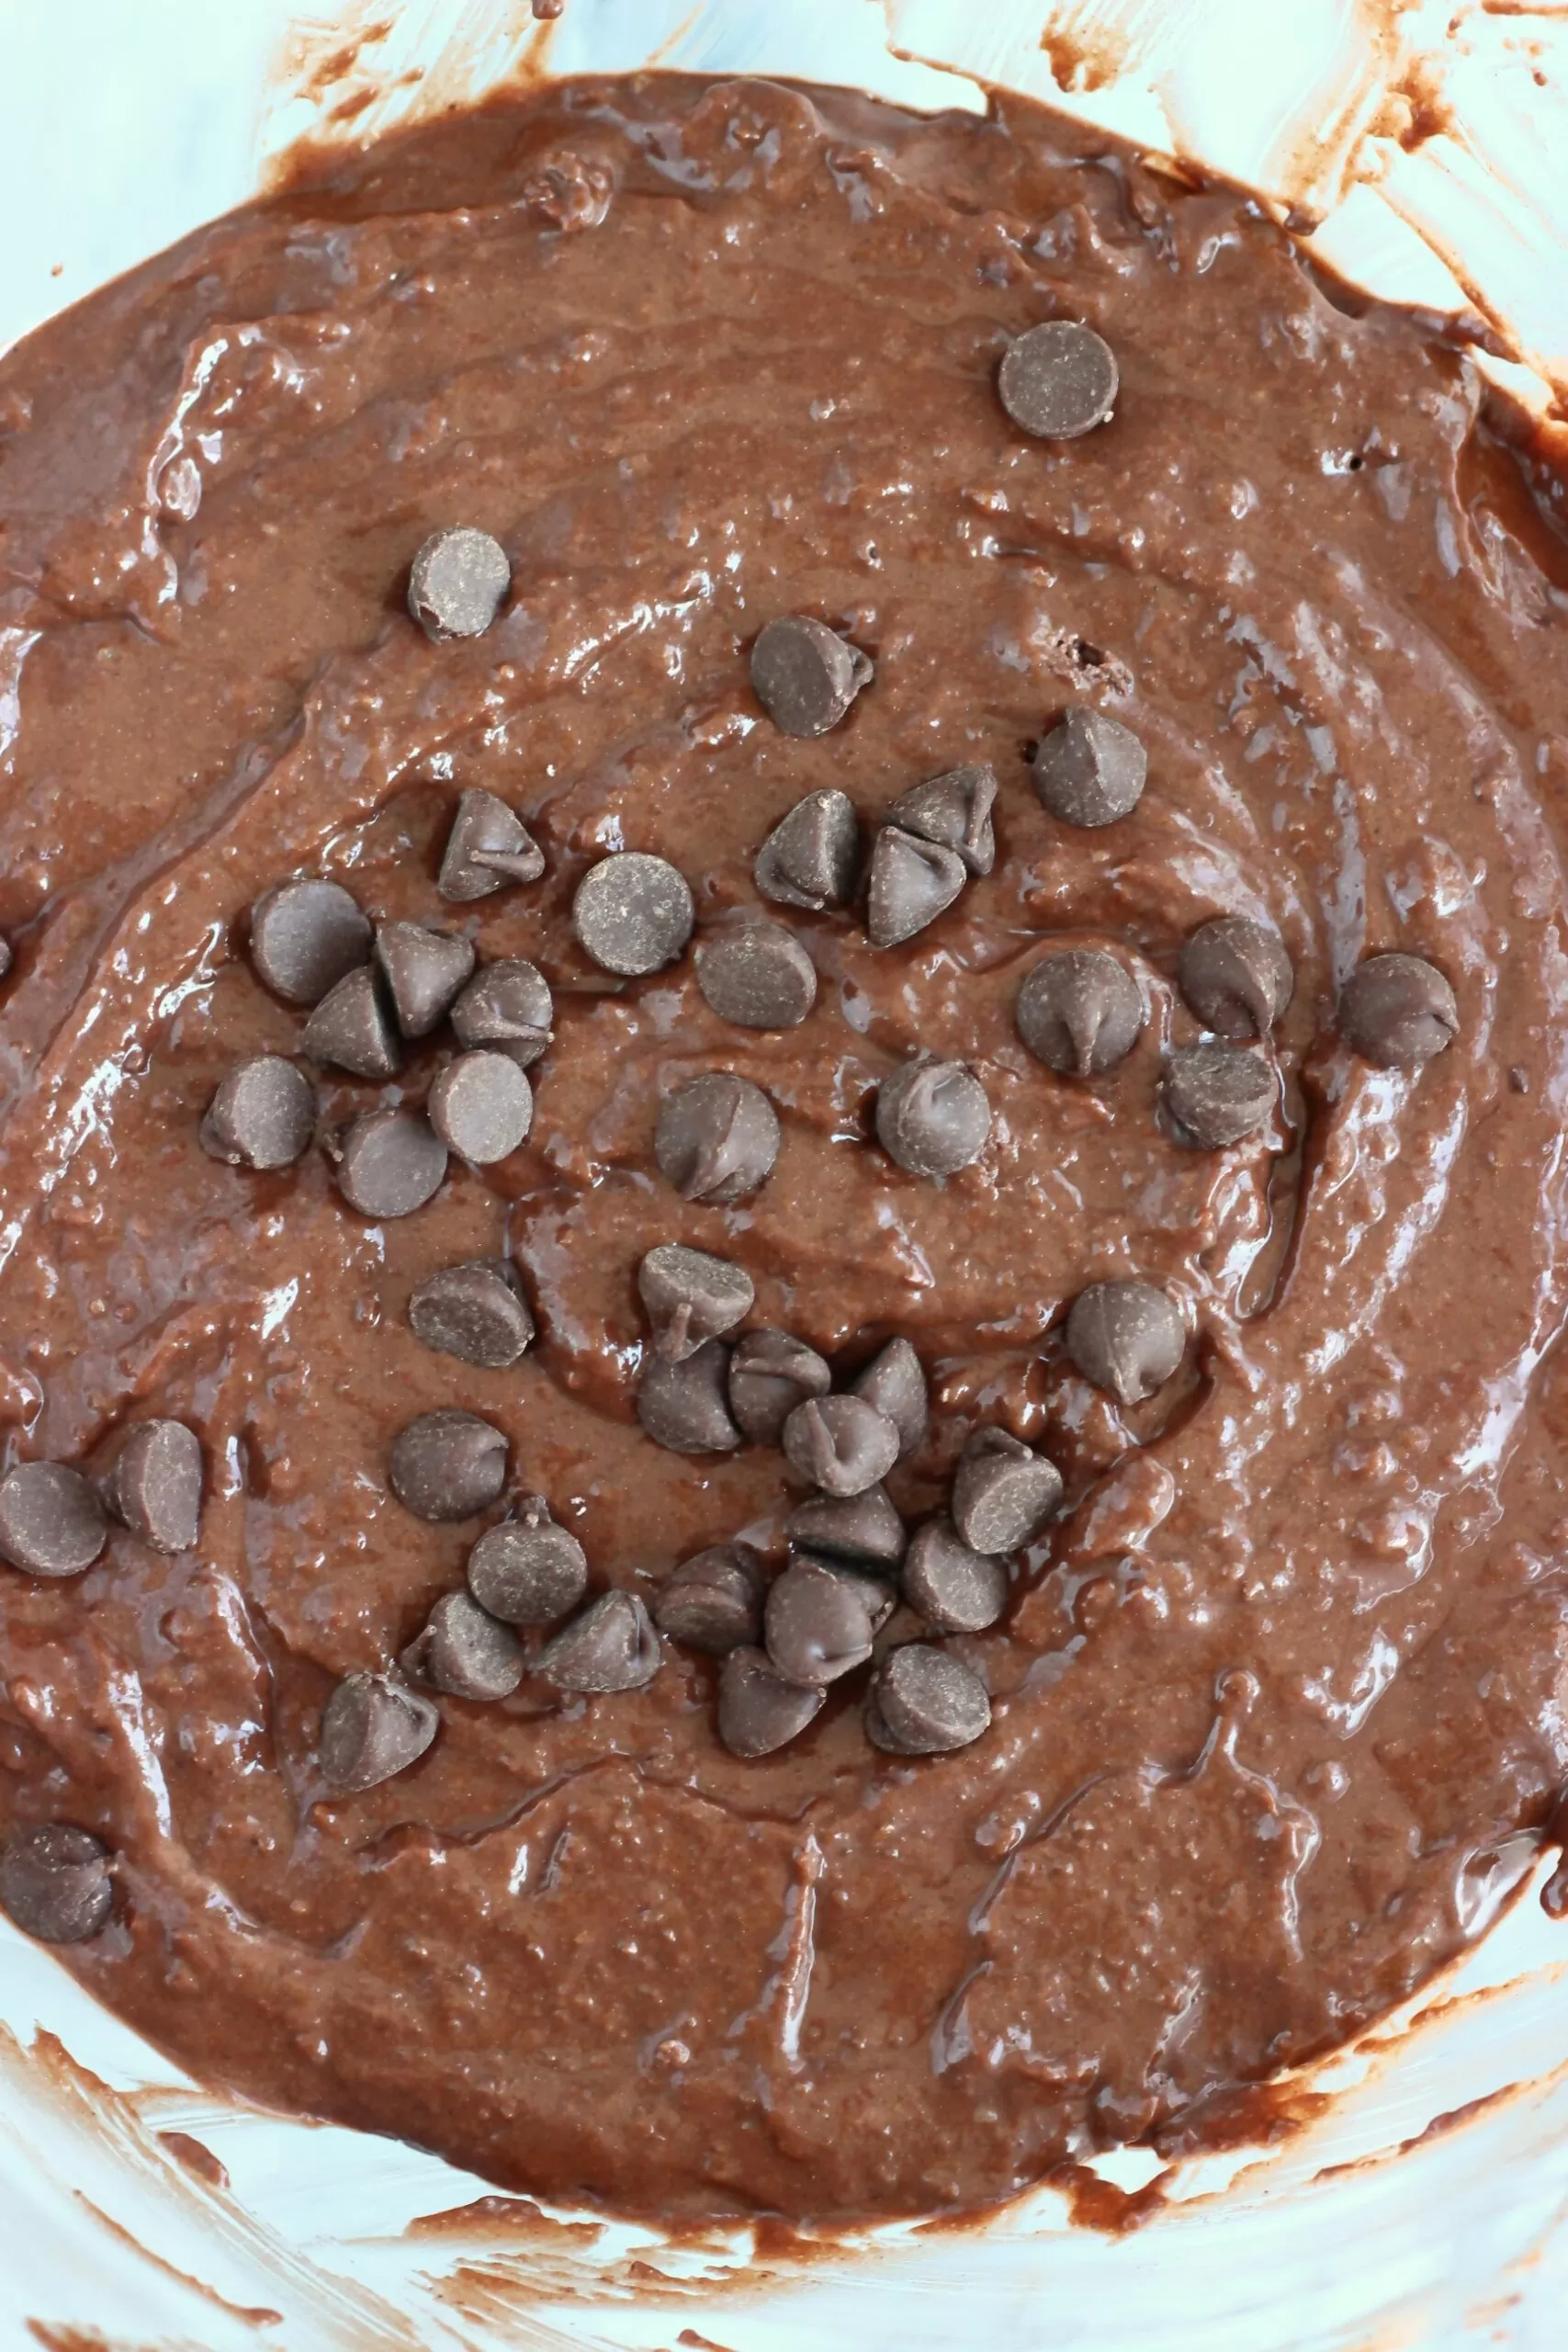 Gluten-free vegan chocolate bread batter with chocolate chips in a mixing bowl